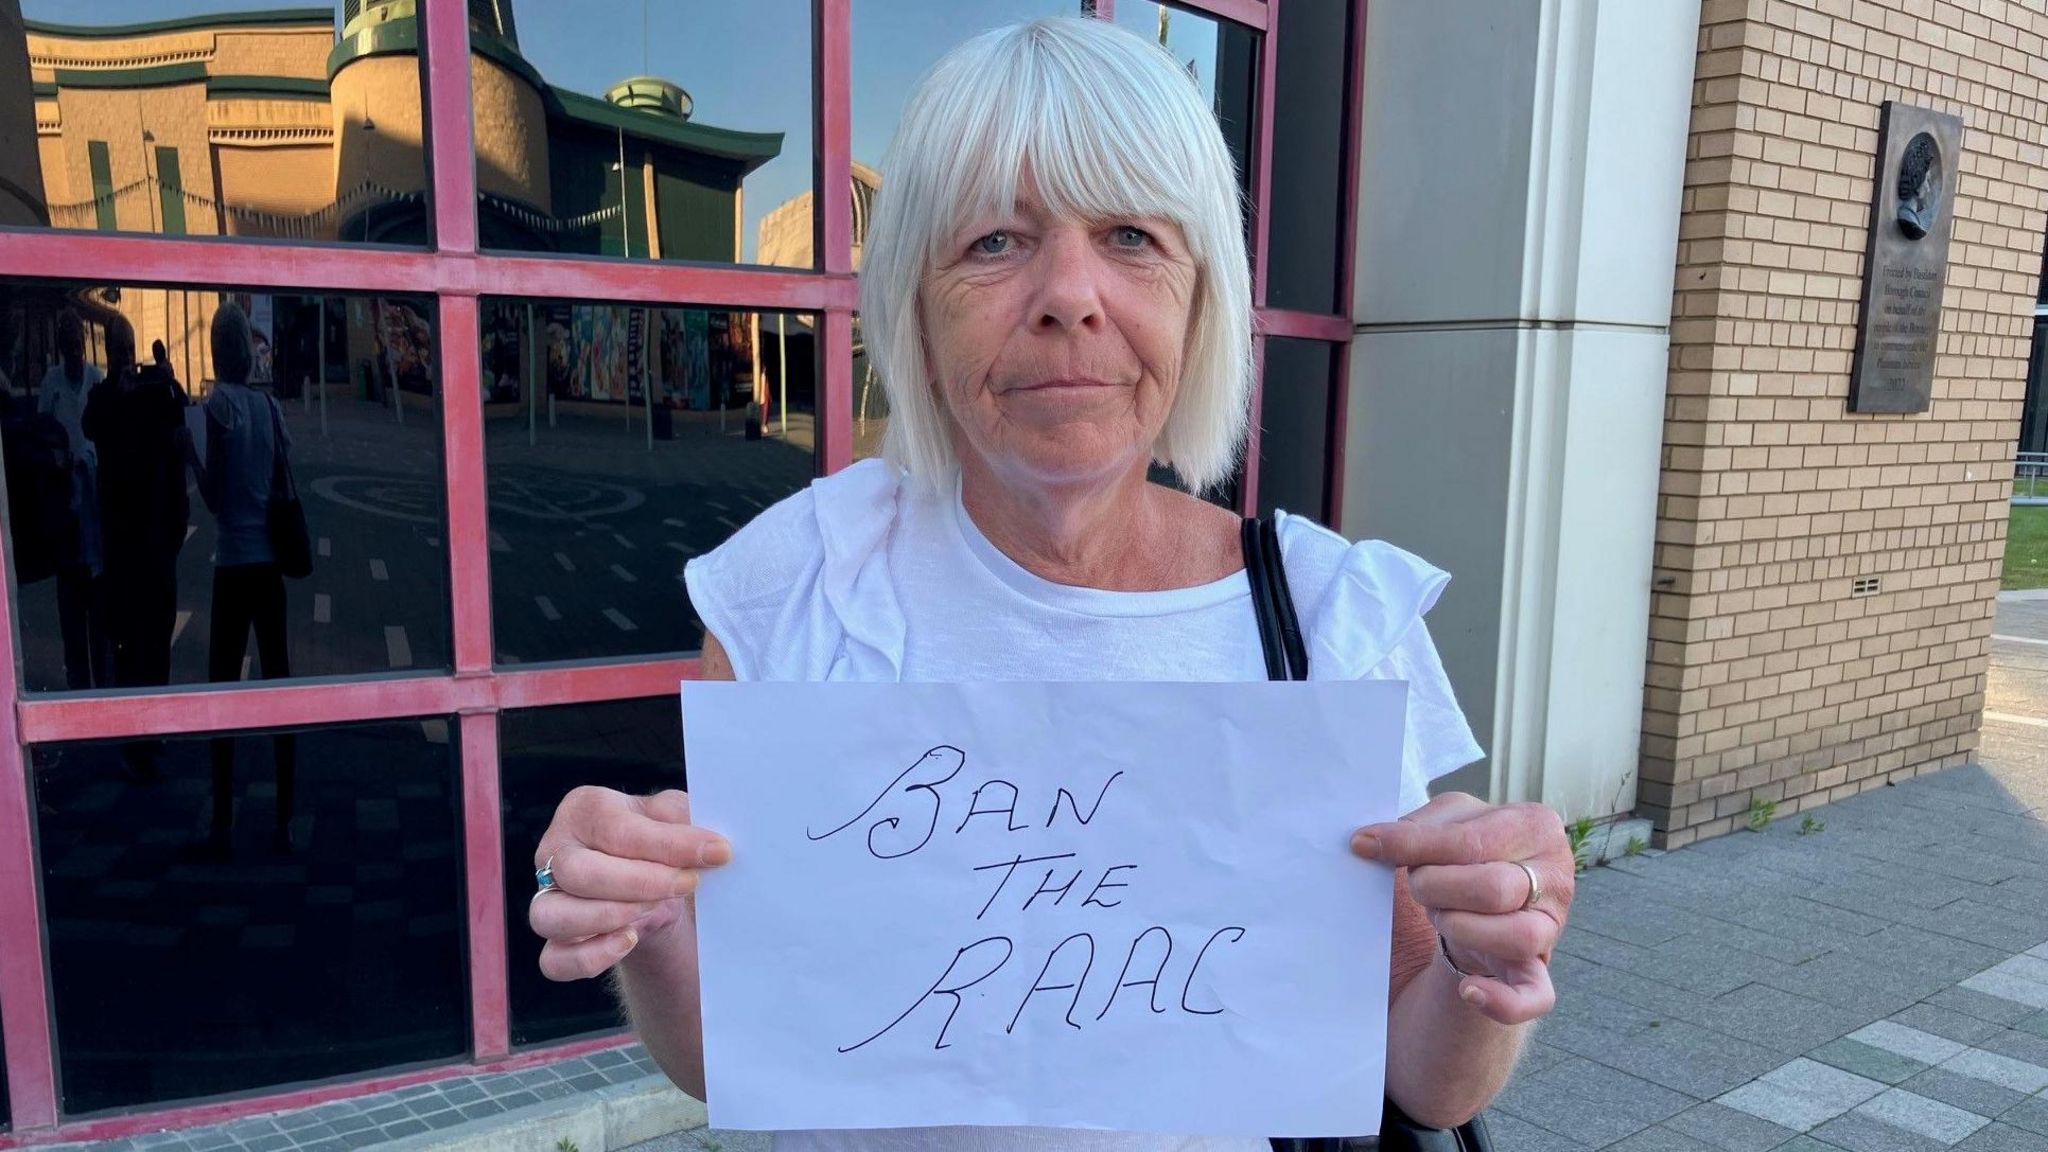 A lady called Sharon Tillbrook holding a 'Ban the Raac' sign outside the Basildon Centre